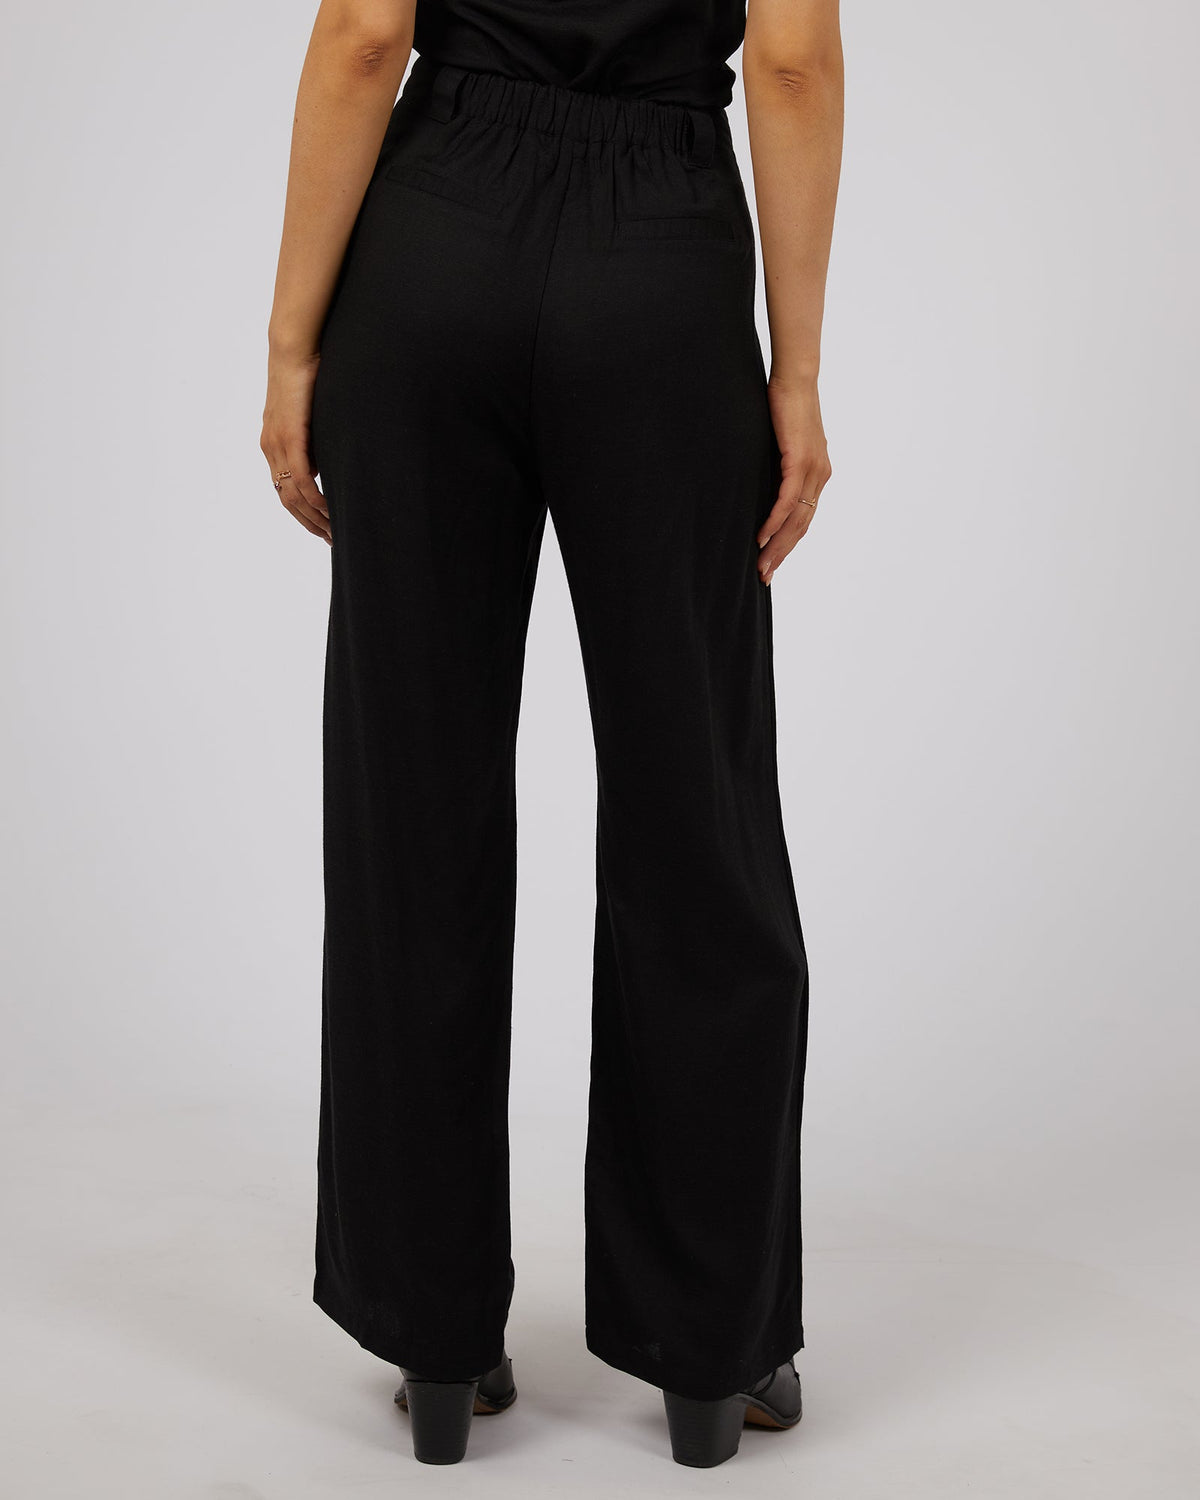 All About Eve-Gracie Pant Black-Edge Clothing